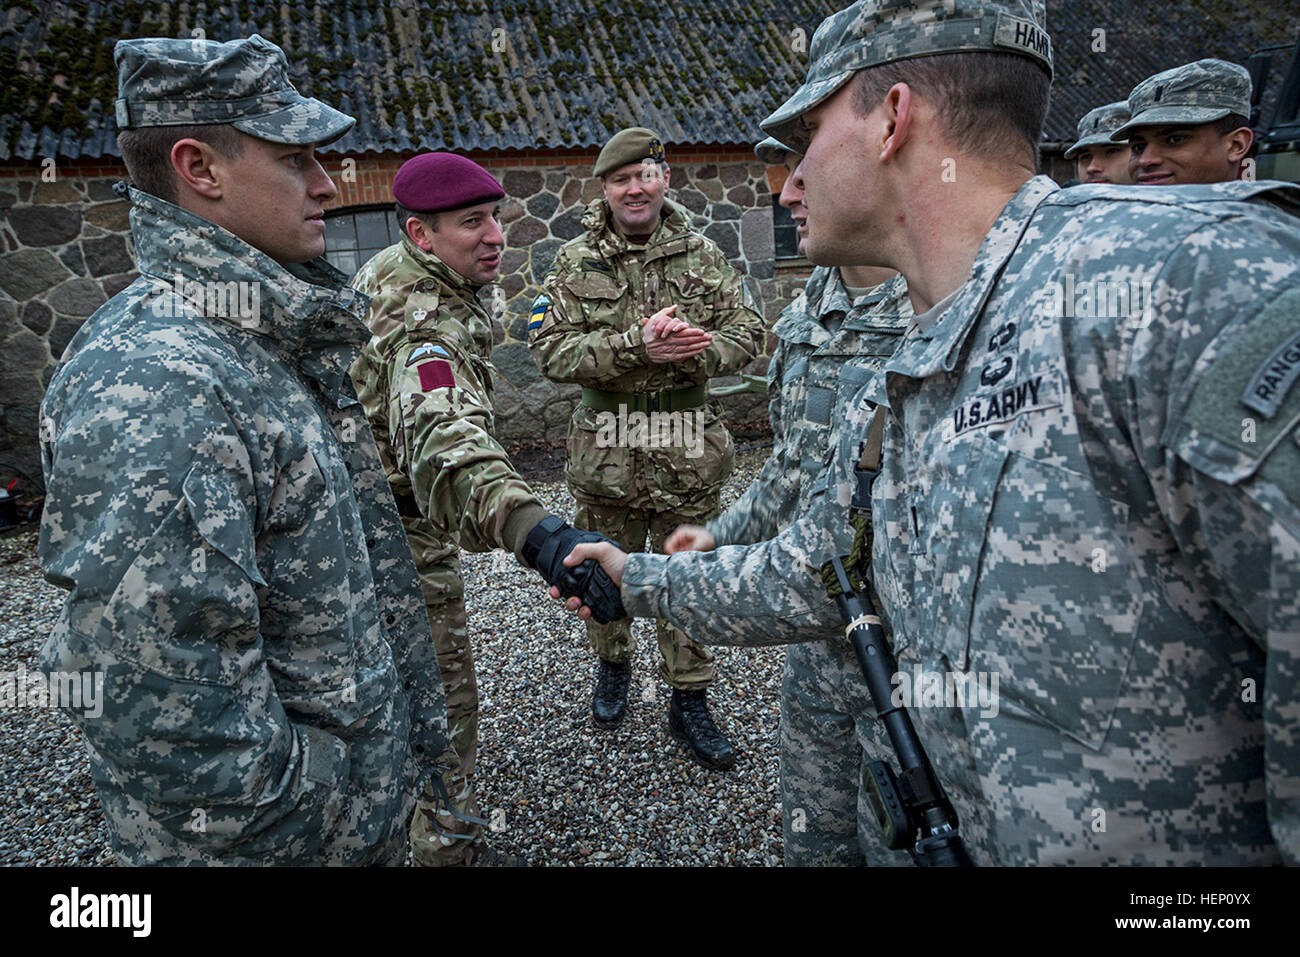 Paratroopers from Company B, 1st Battalion, 503rd Infantry Regiment , 173rd Airborne Brigade, shake hands with British soldiers from Queens Company, Grenadier Guards, during Exercise White Sword here, Dec. 8 2014. Exercise White Sword is a multinational exercise involving over 1500 NATO troops from Denmark, the United Kingdom and the U.S., and designed increase interoperability between allied forces and certify the Danish 2nd Brigade RBG for the 2015 NATO Reaction Force. (U.S. Army Photo by Sgt. Benjamin John) Exercise White Sword 141208-A-DS355-073 Stock Photo